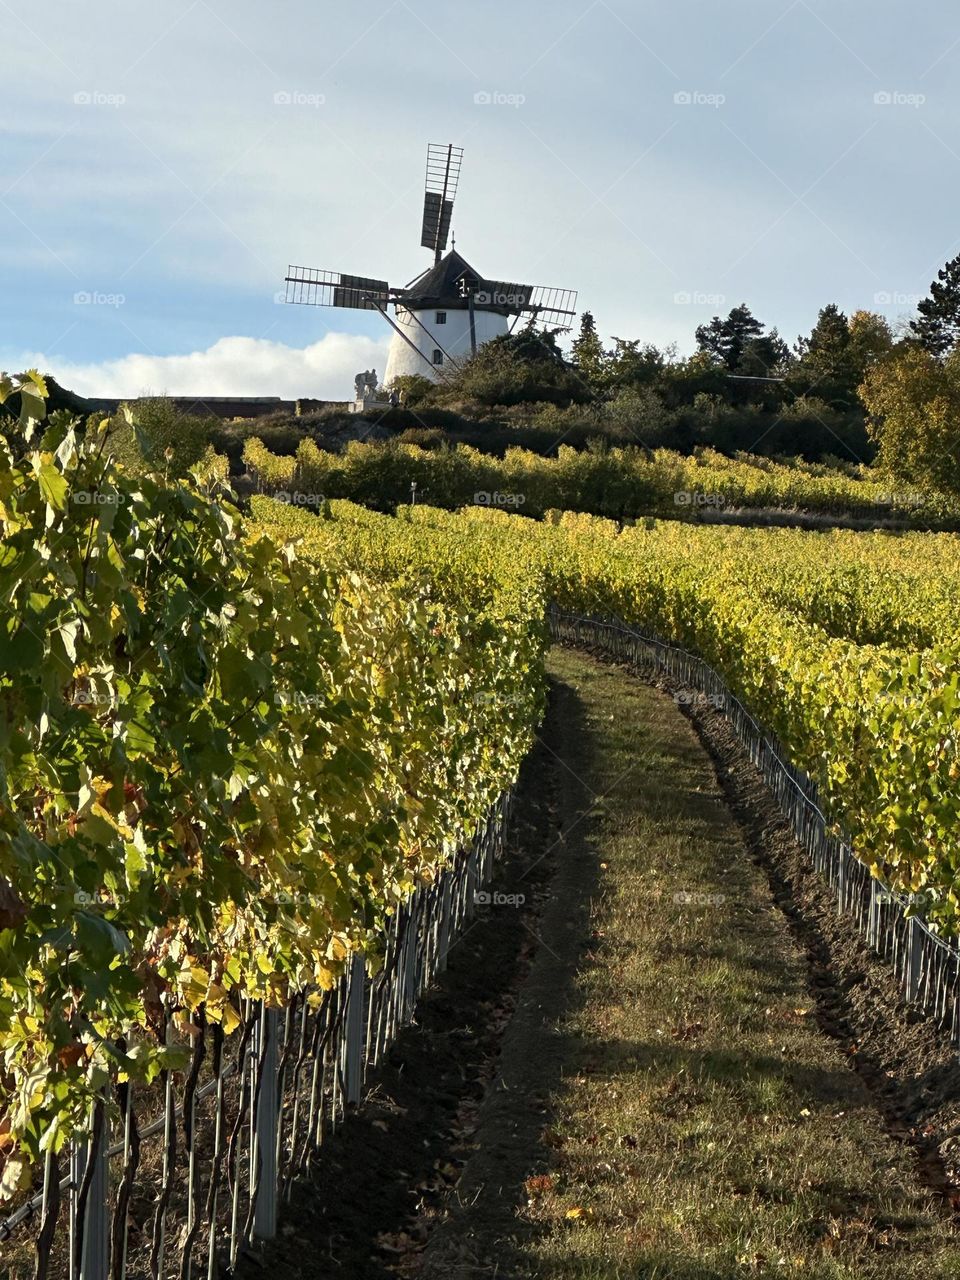 Autumn vineyards with a windmill in the background 